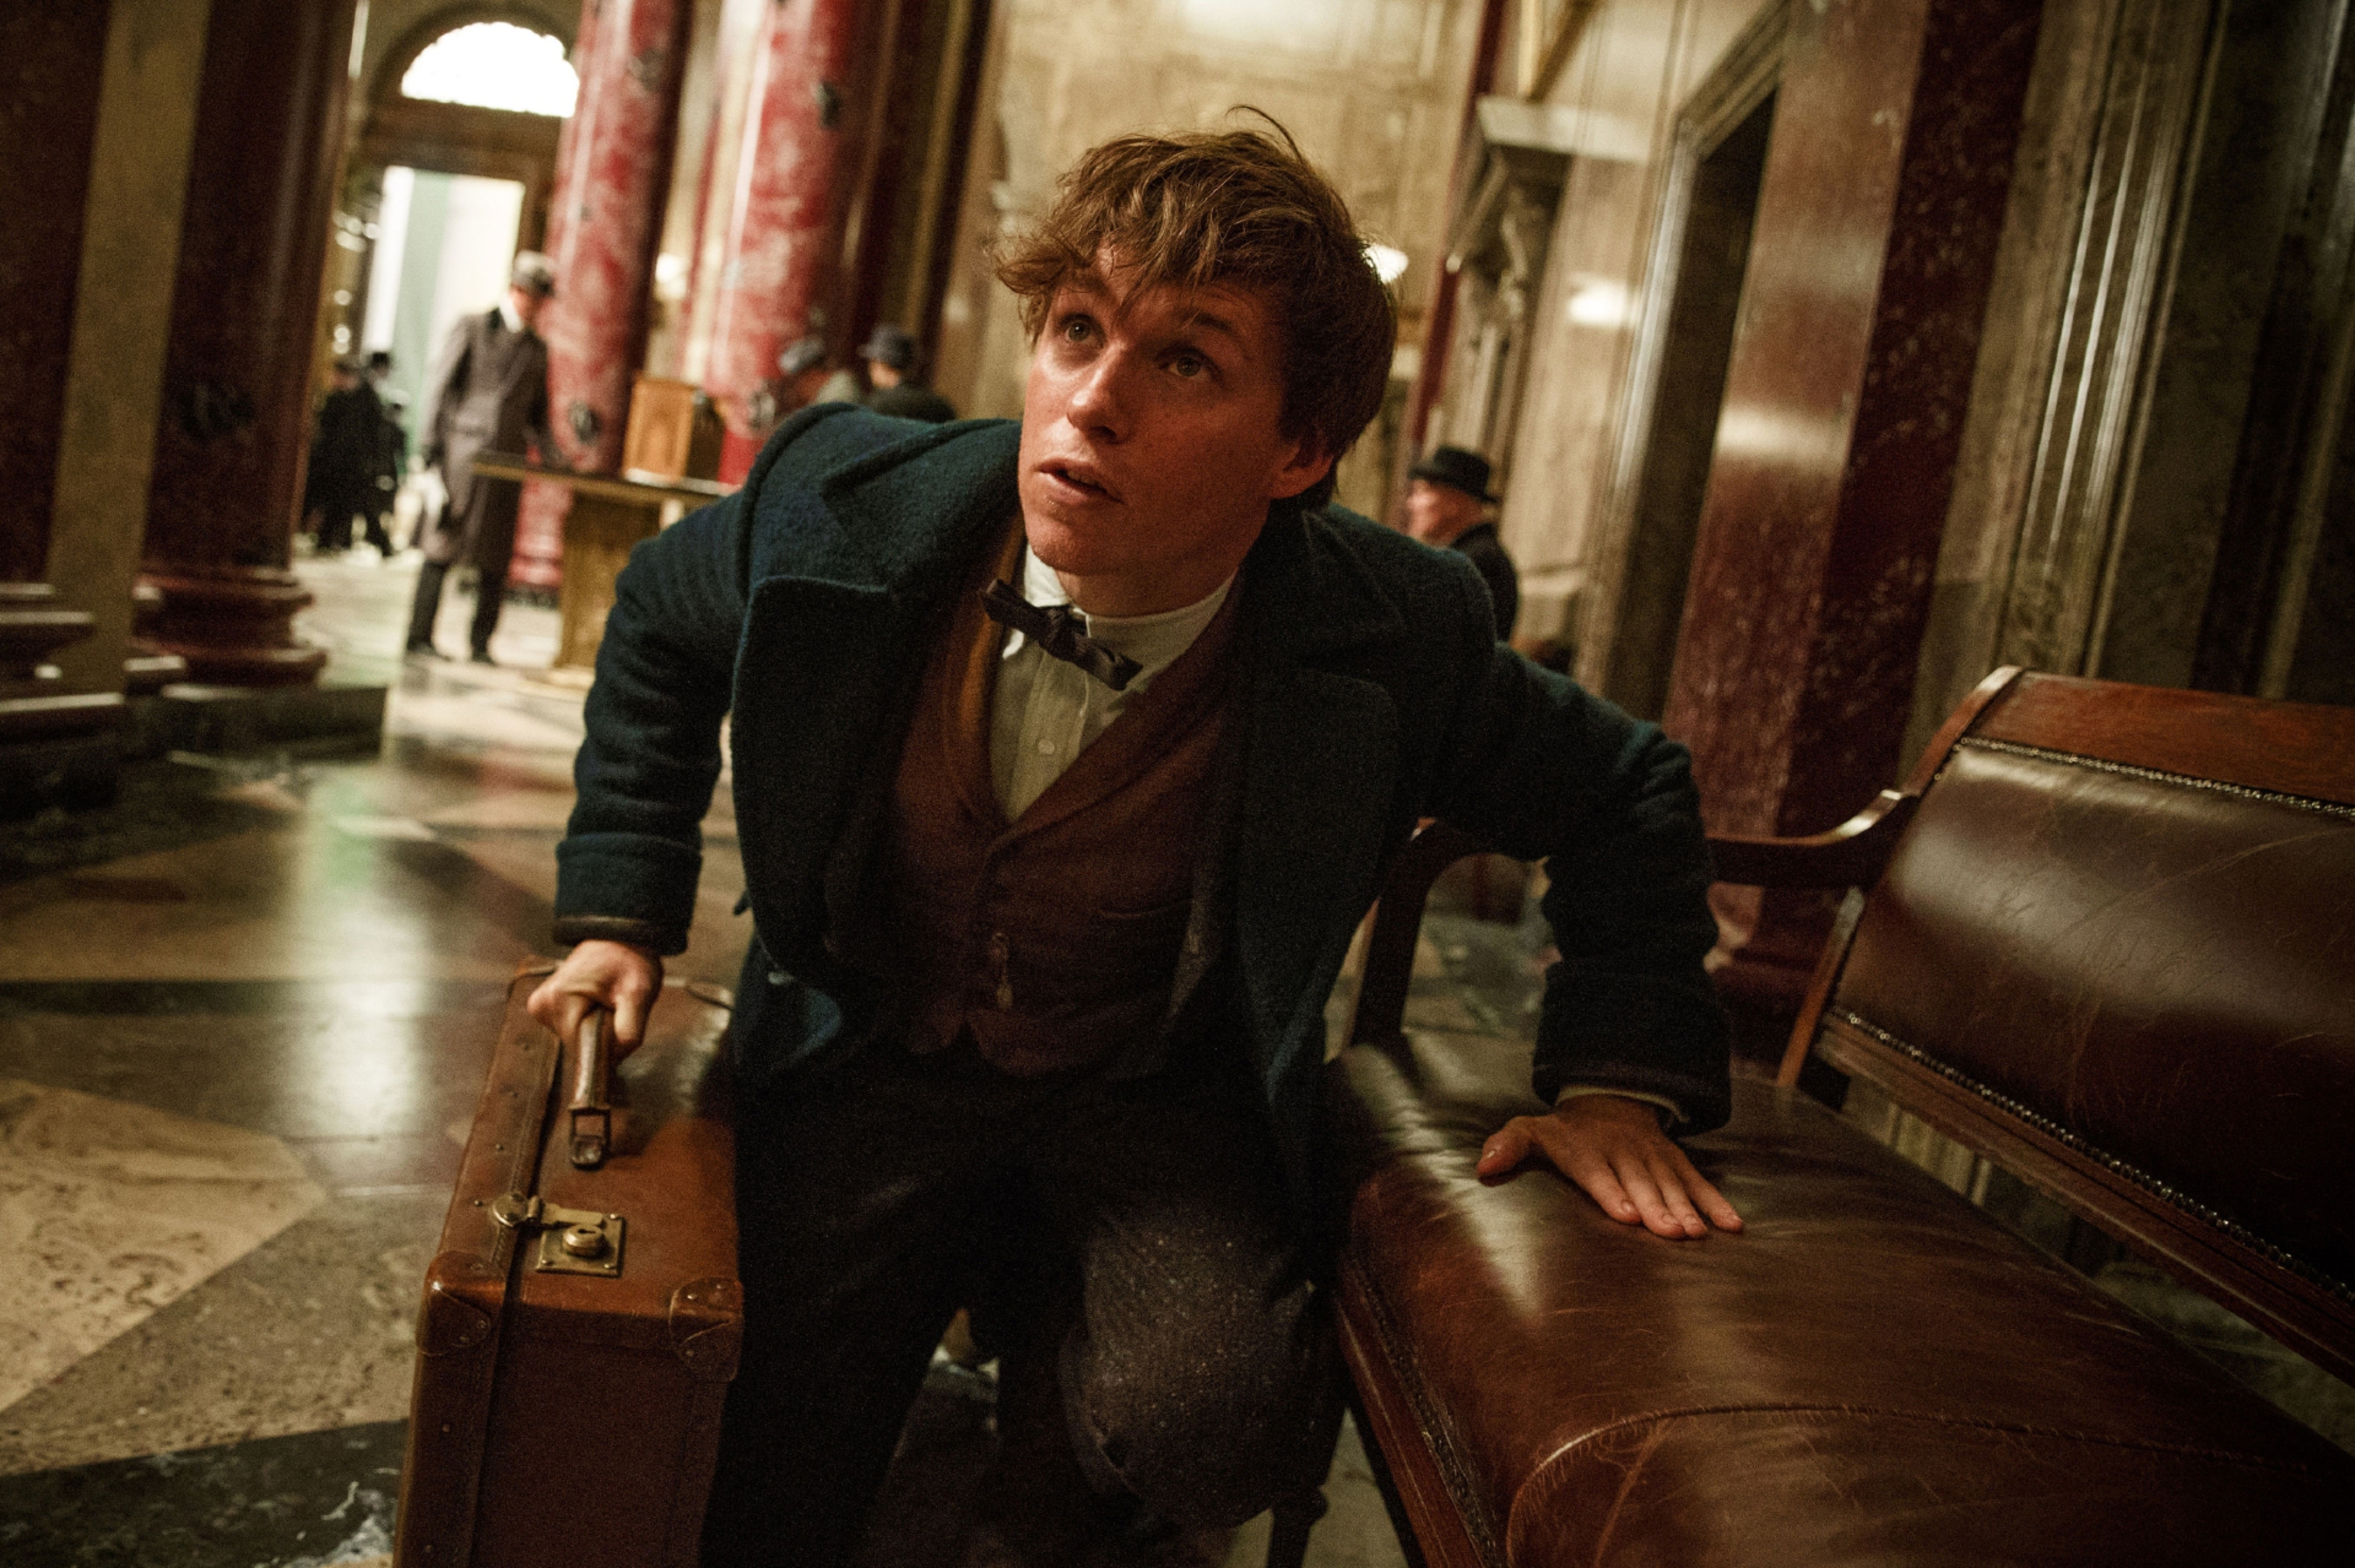 Undated Film Still Handout from FANTASTIC BEASTS AND WHERE TO FIND THEM. Pictured: Eddie Redmayne as Newt Scamander. See PA Feature FILM Reviews. Picture credit should read: PA Photo/Warner Bros. WARNING: This picture must only be used to accompany PA Feature FILM Reviews.